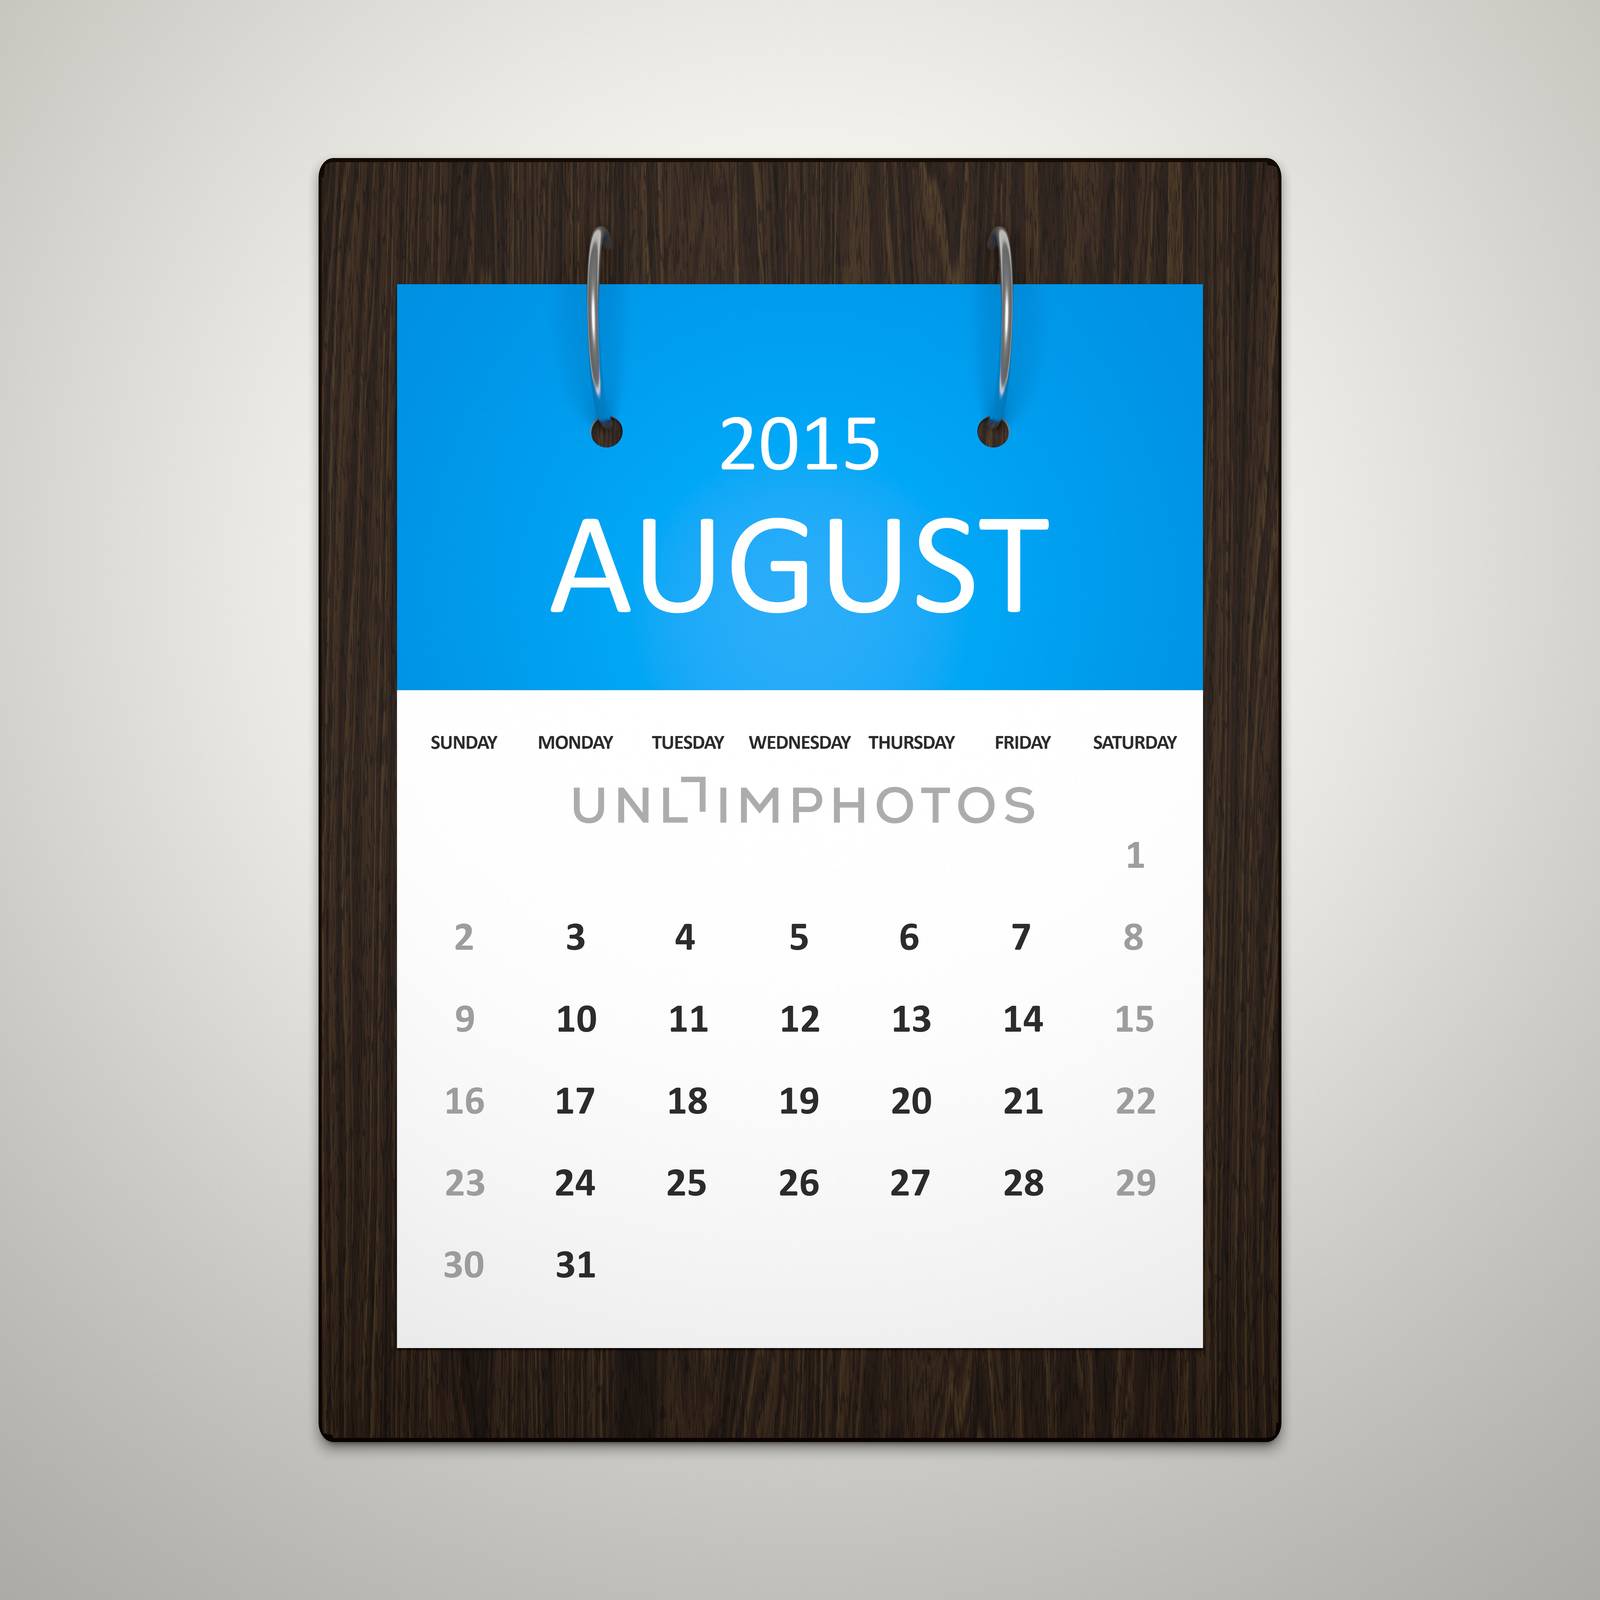 An image of a stylish calendar for event planning August 2015